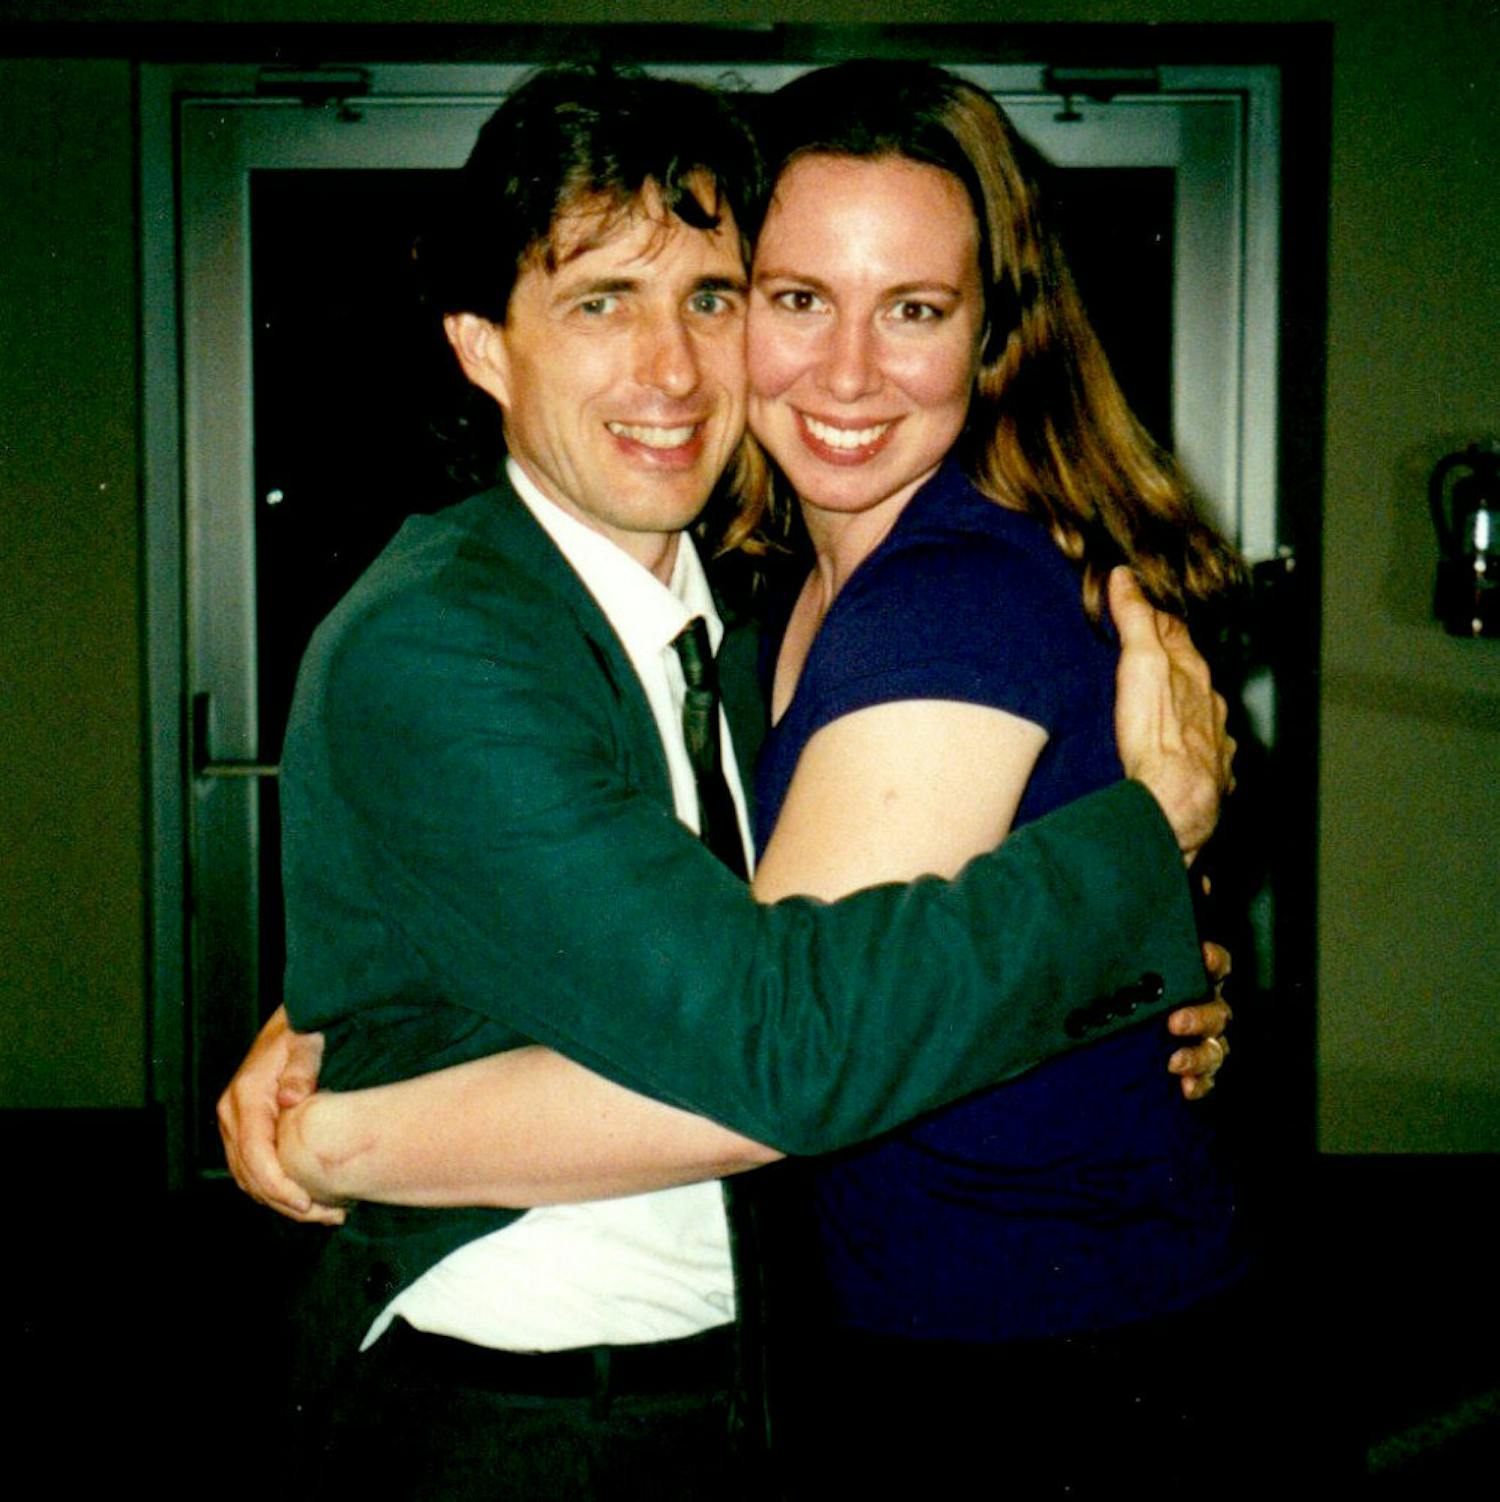 UF dance professor Richard Rose and his former dance student, Lynn Forney, pose for a photo in the 2000-2001 school year, when she was still a UF student. The 40-year-old said one of her proudest moments was when Rose hugged her after she won the most outstanding senior award in the UF School of Theatre and Dance.